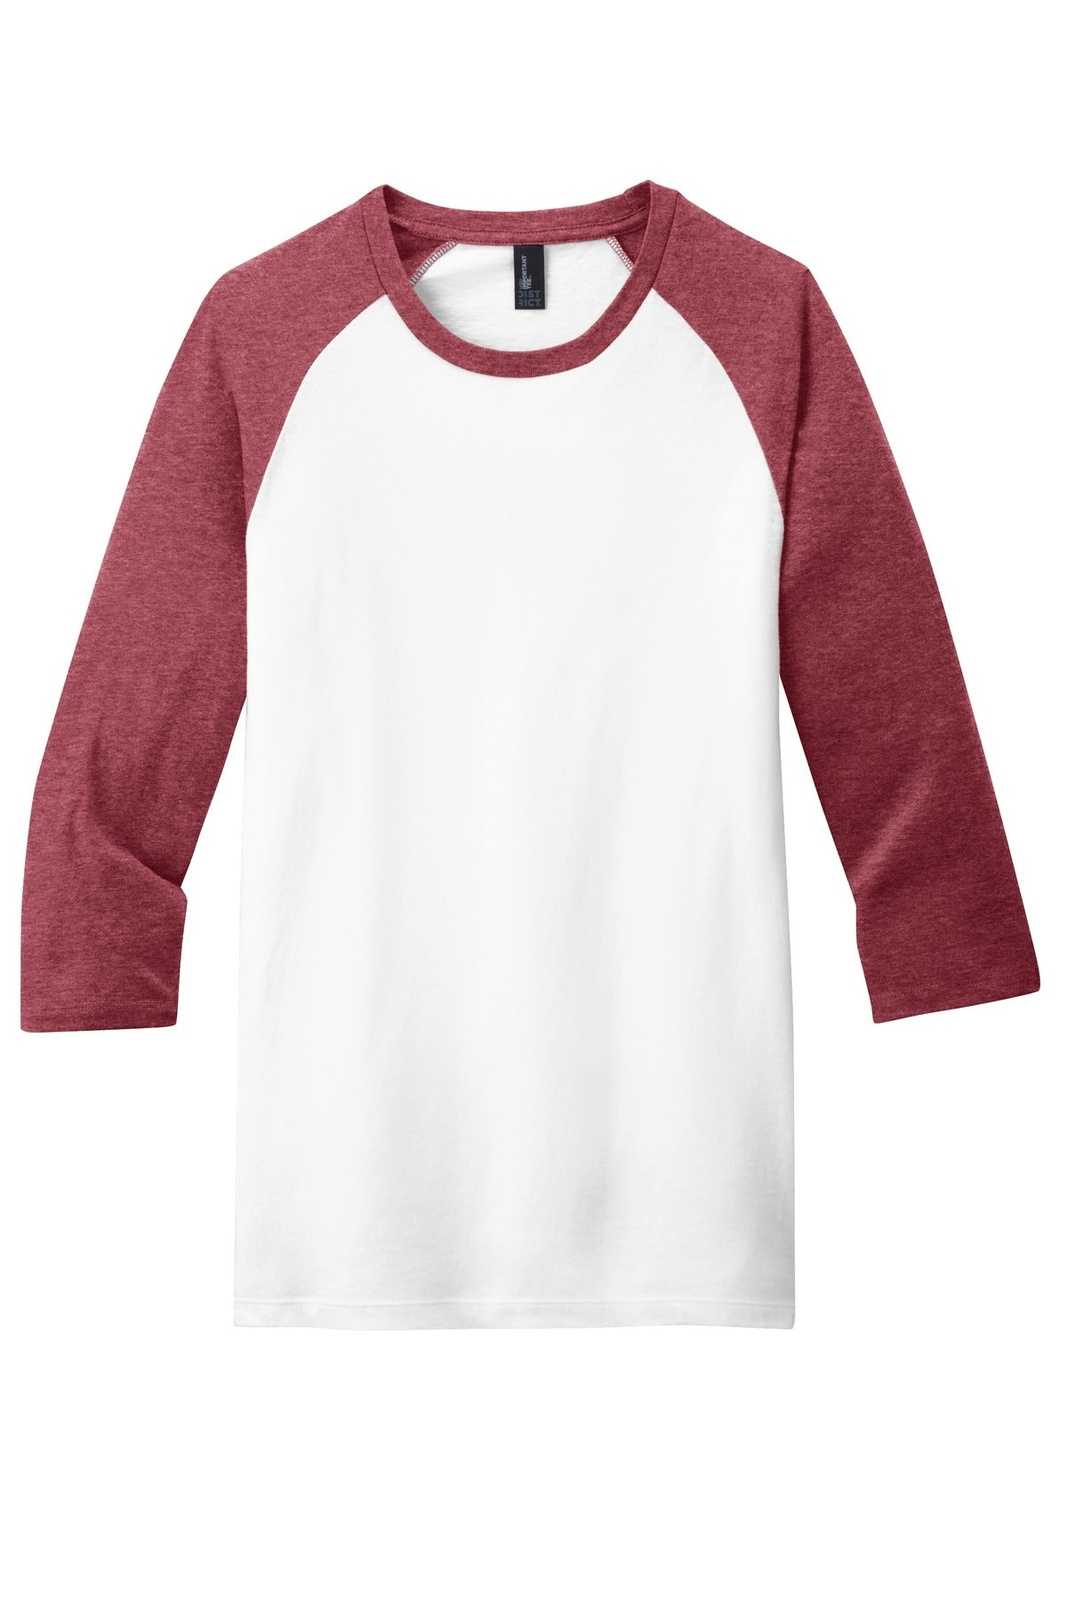 District DT6210 Very Important Tee 3/4-Sleeve Raglan - Heathered Red White - HIT a Double - 5